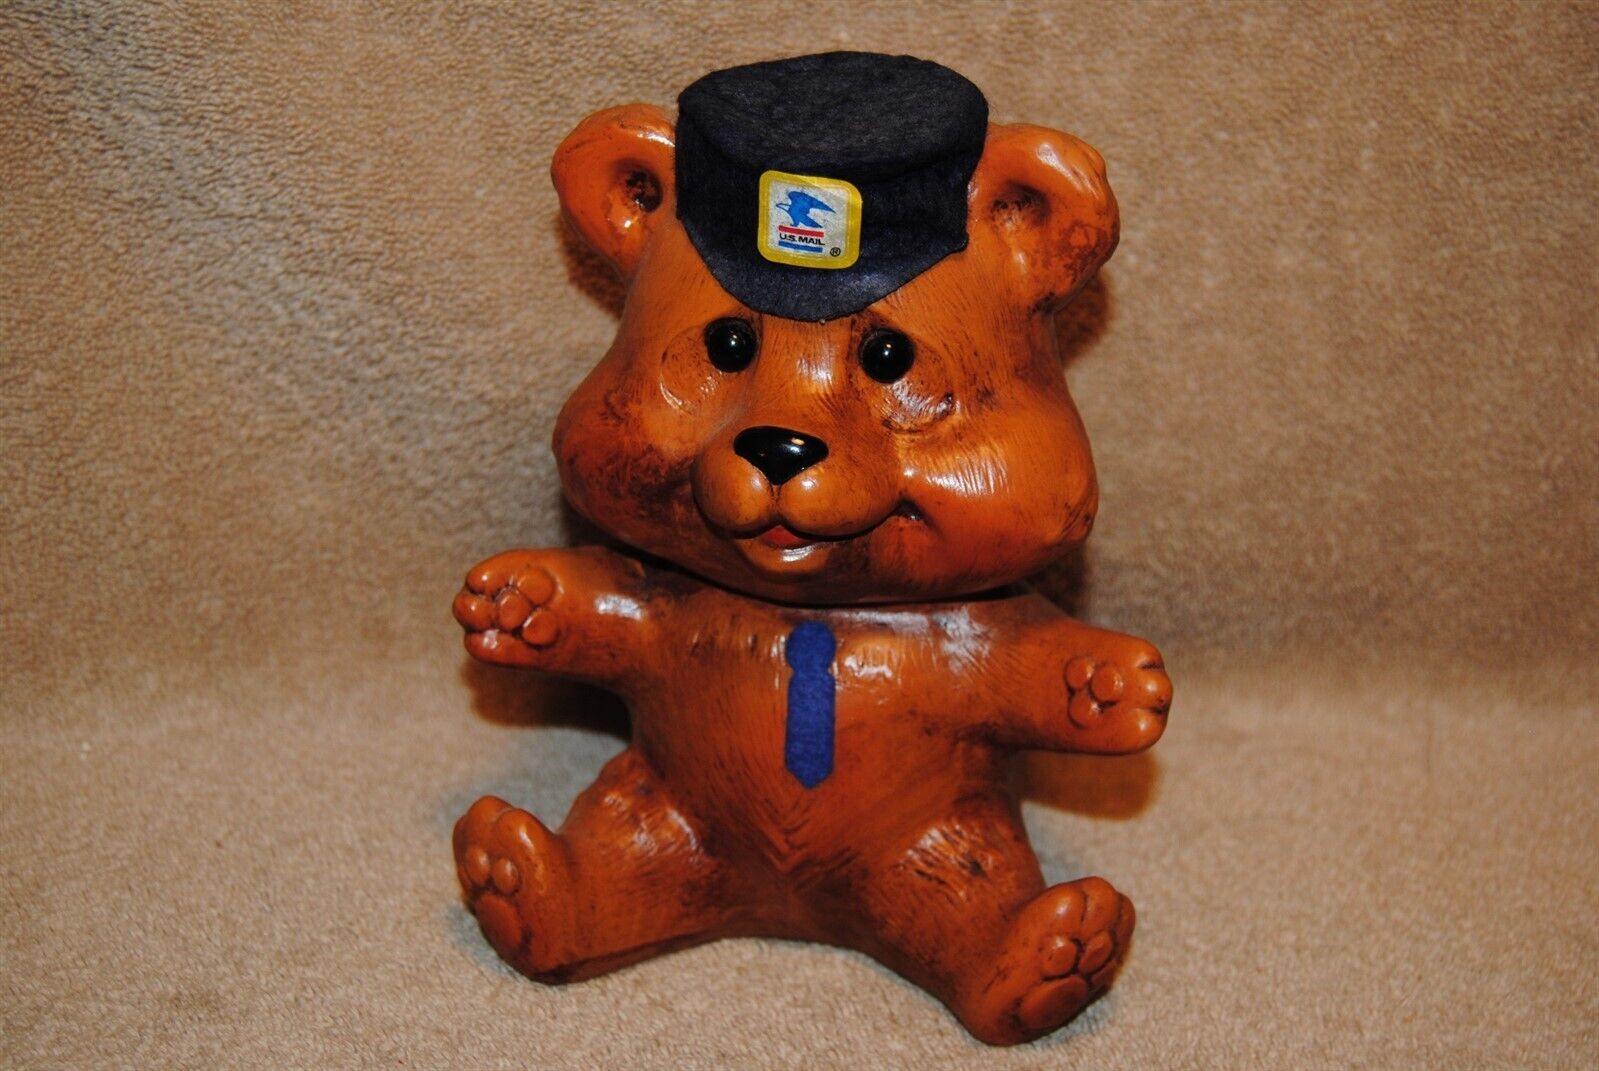 Vintage US Mail Teddy Bear Bank Promo for Mail Carriers Only Plastic Nice